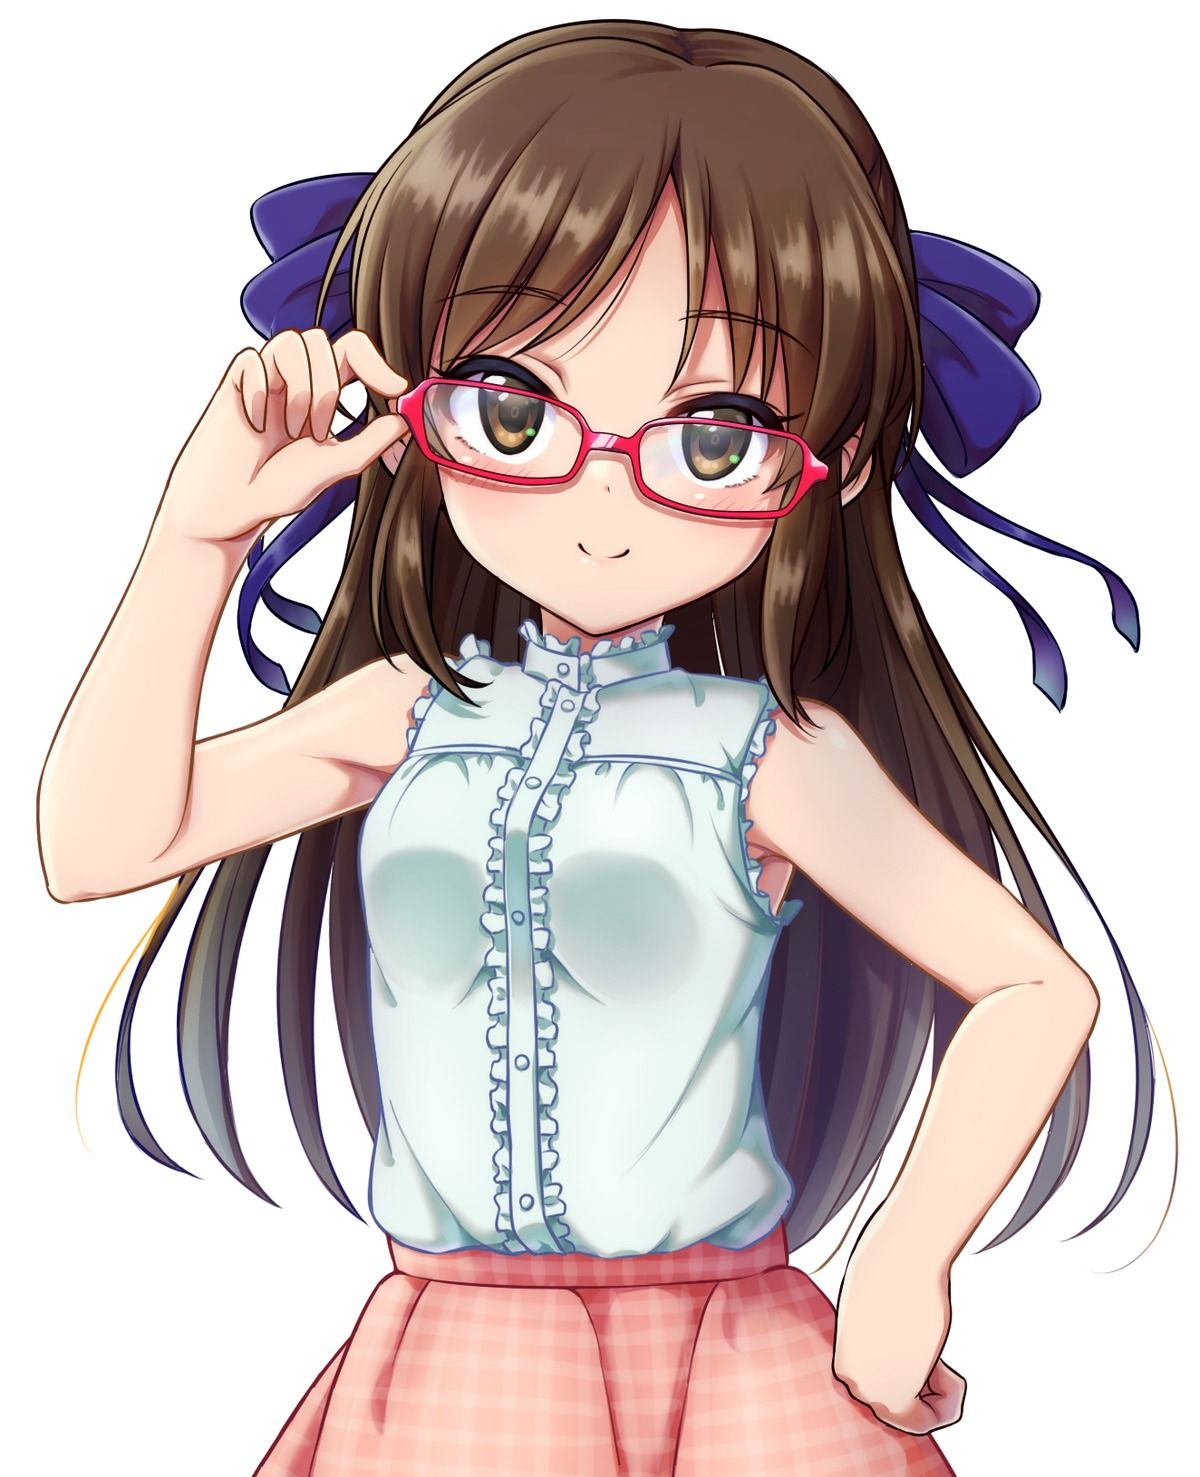 [Deremas] Tachibana and be Chan the cute image! Uniforms, scarves, glasses, across the stars! [Pictures and wallpapers] (The idolmaster 17) 1